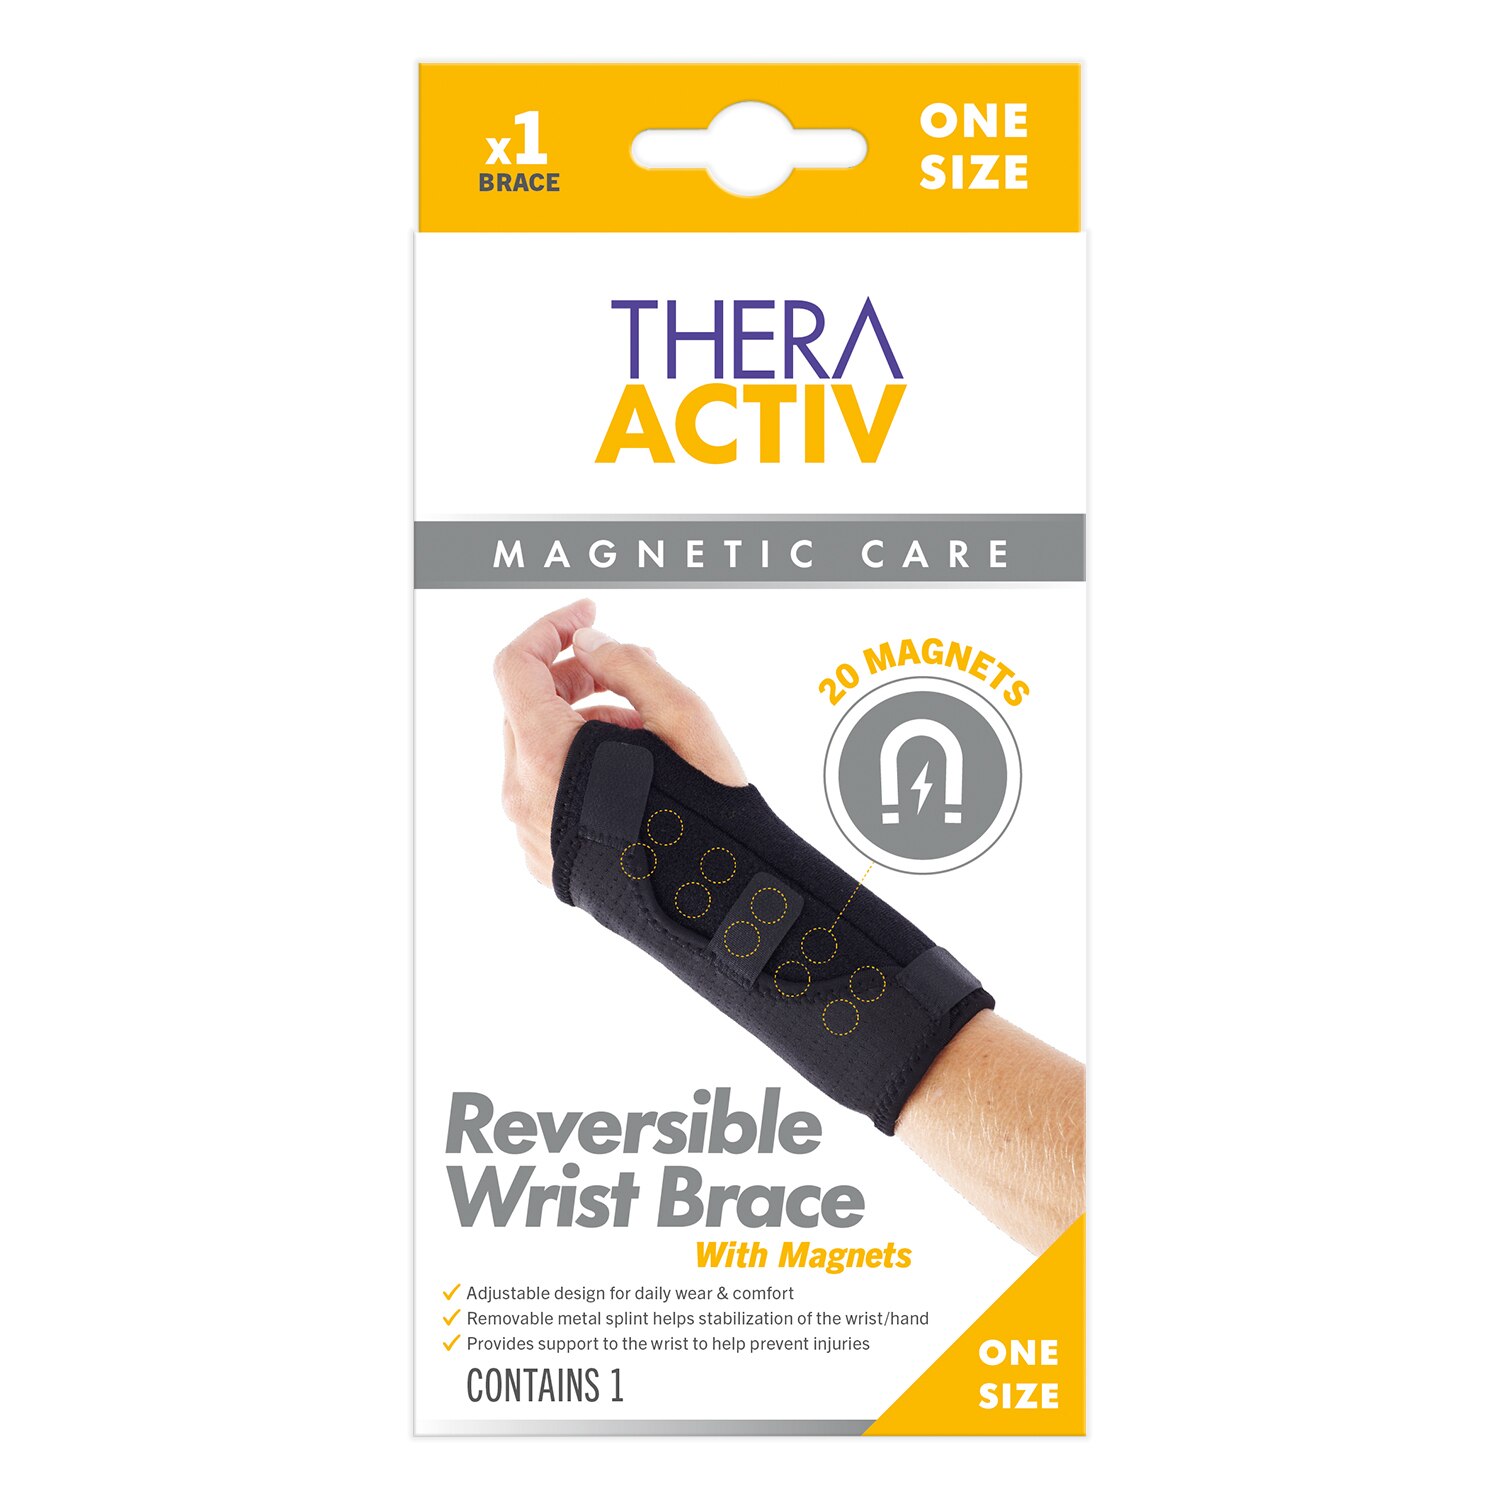 TheraActiv Magnetic Reversible Wrist Brace - One Size